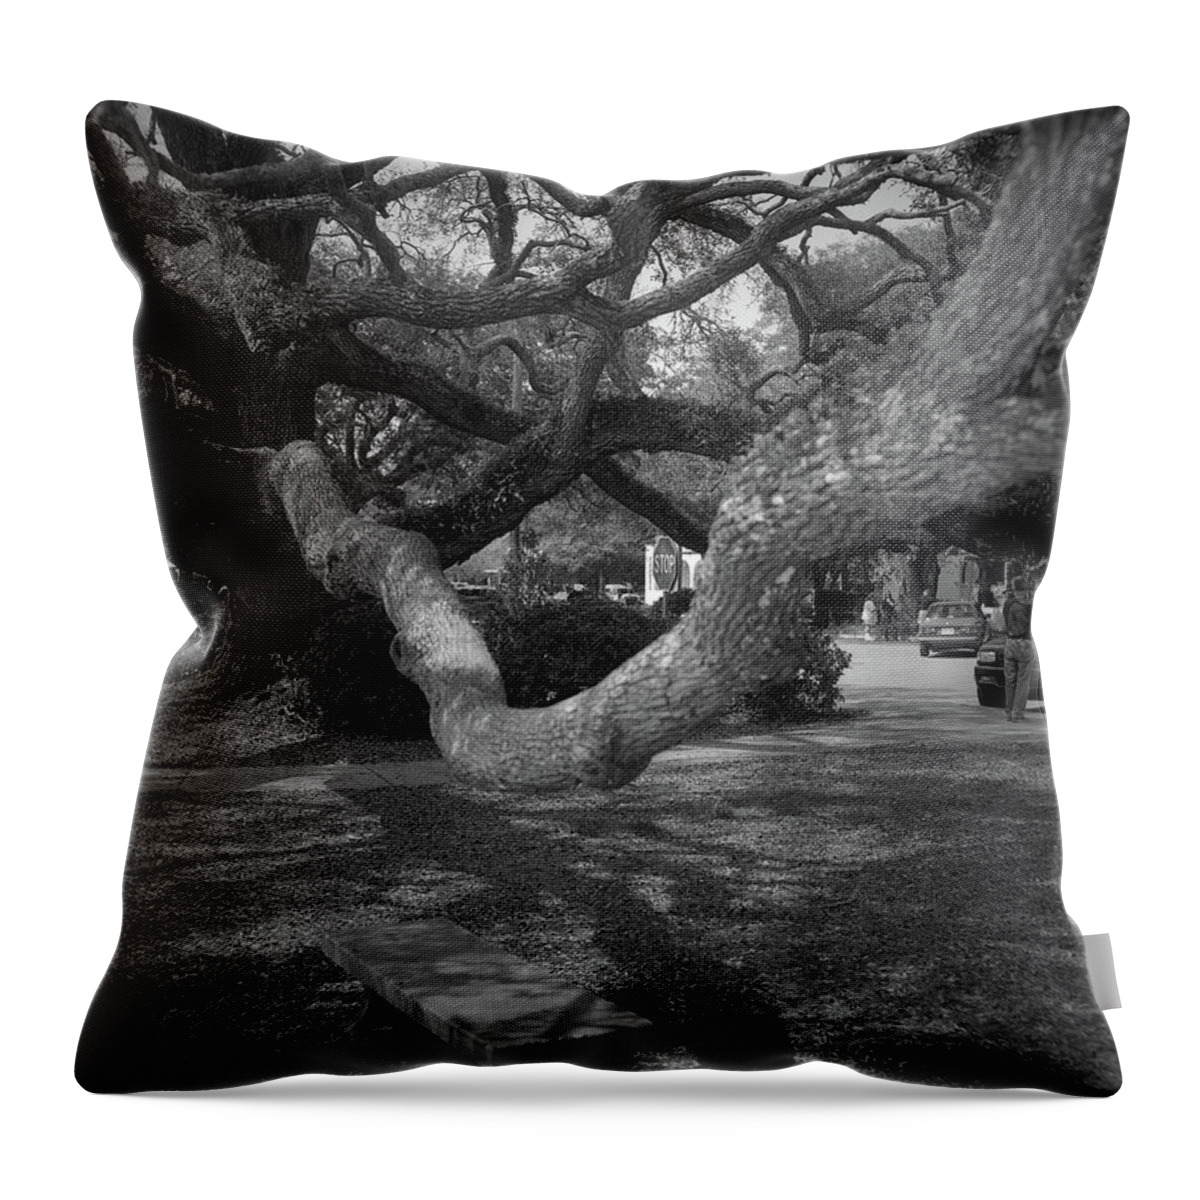 Benches Throw Pillow featuring the photograph Postell Park Bench, St. Simons Island, 2004 by John Simmons